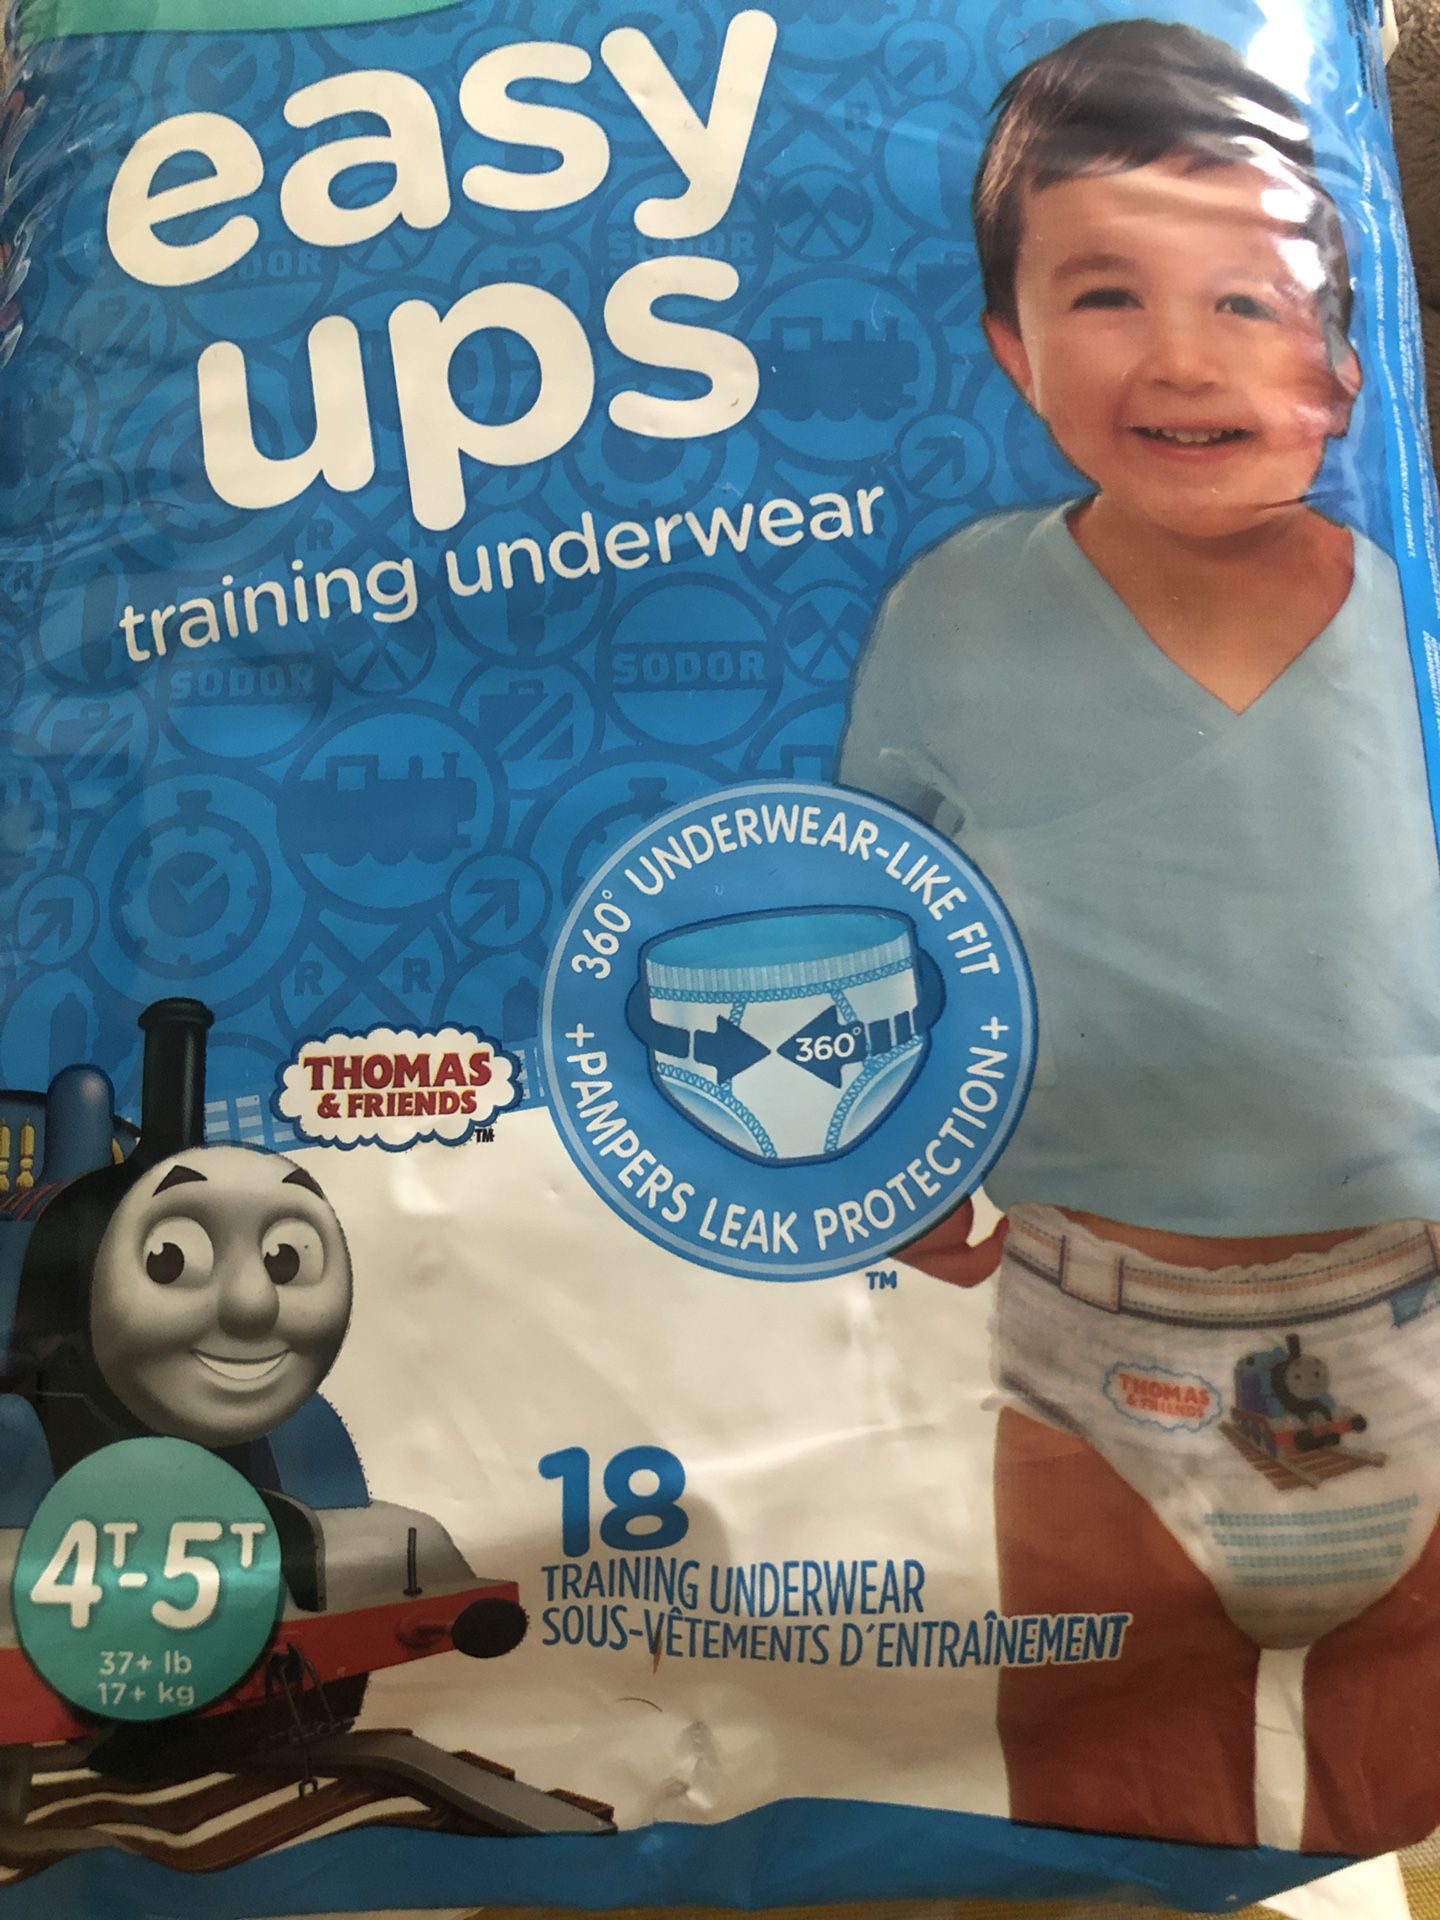 Pampers Easyups